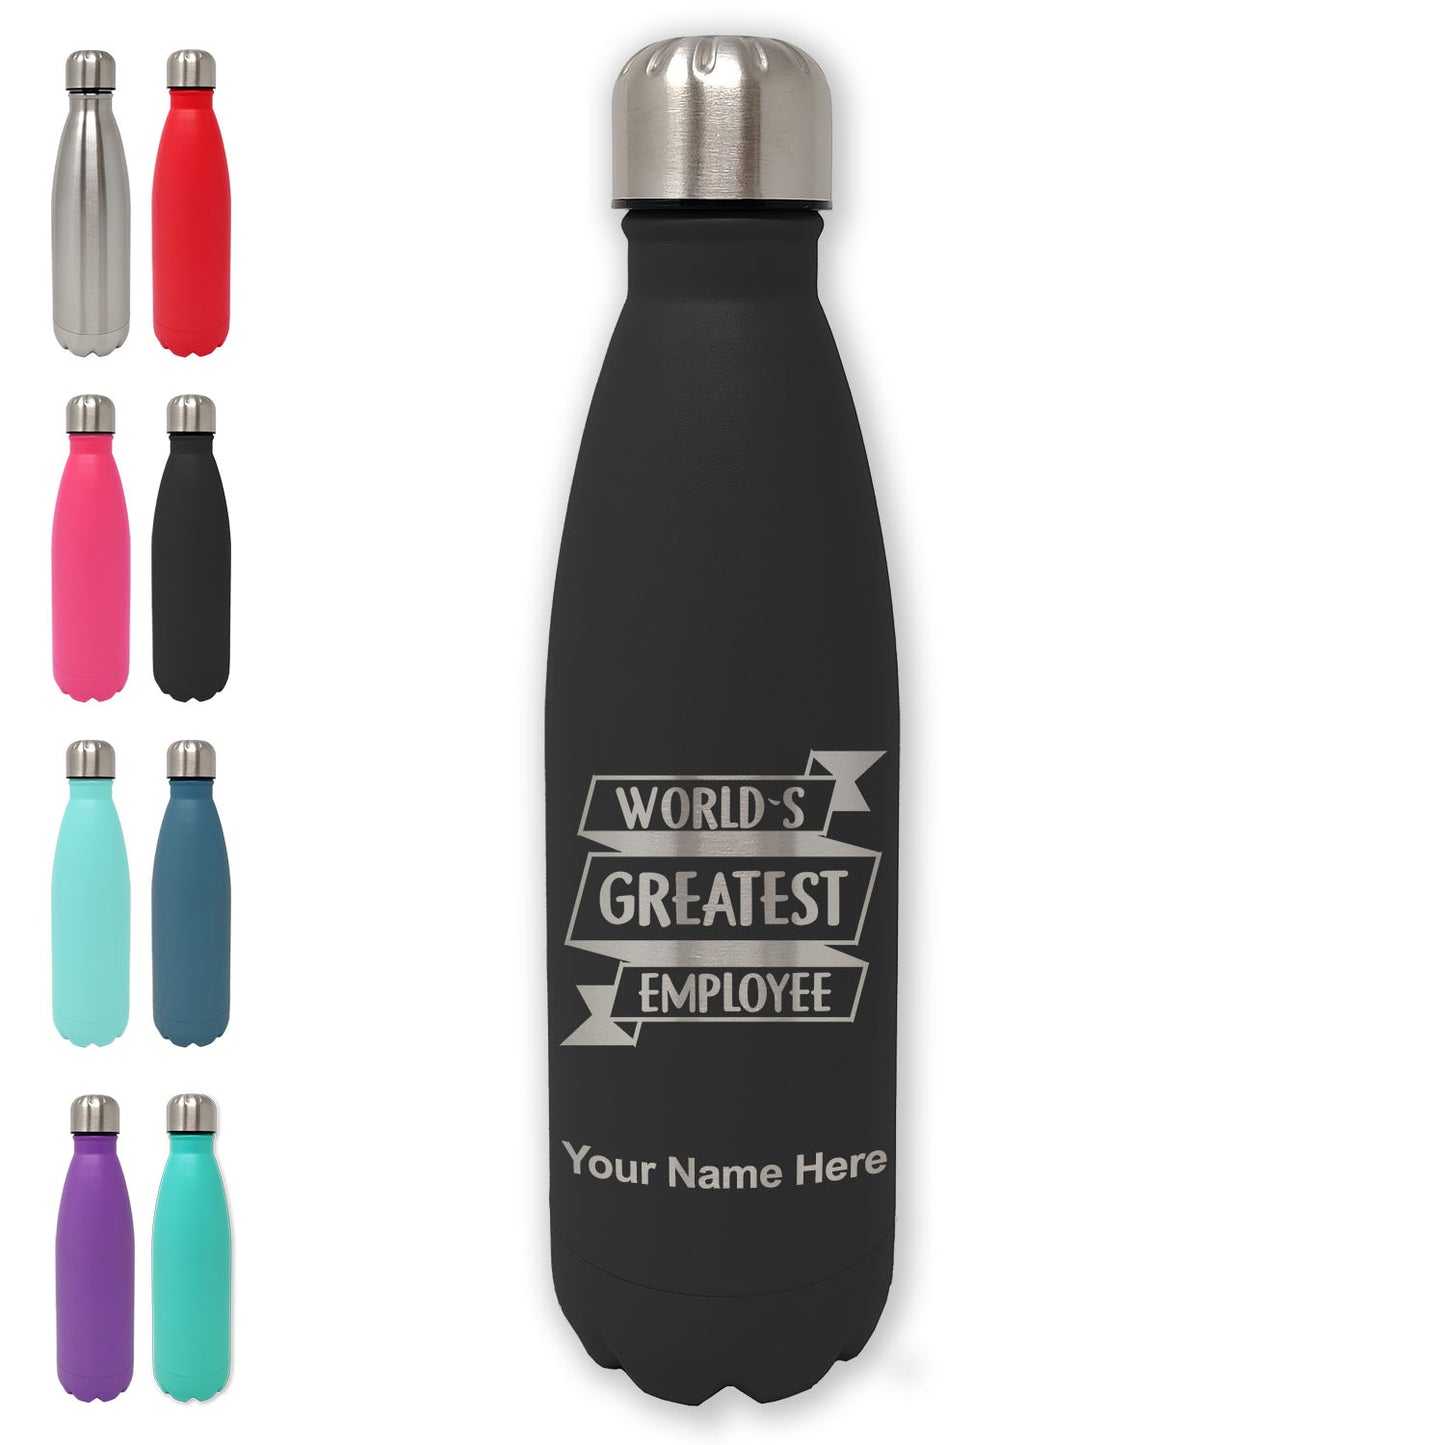 LaserGram Double Wall Water Bottle, World's Greatest Employee, Personalized Engraving Included